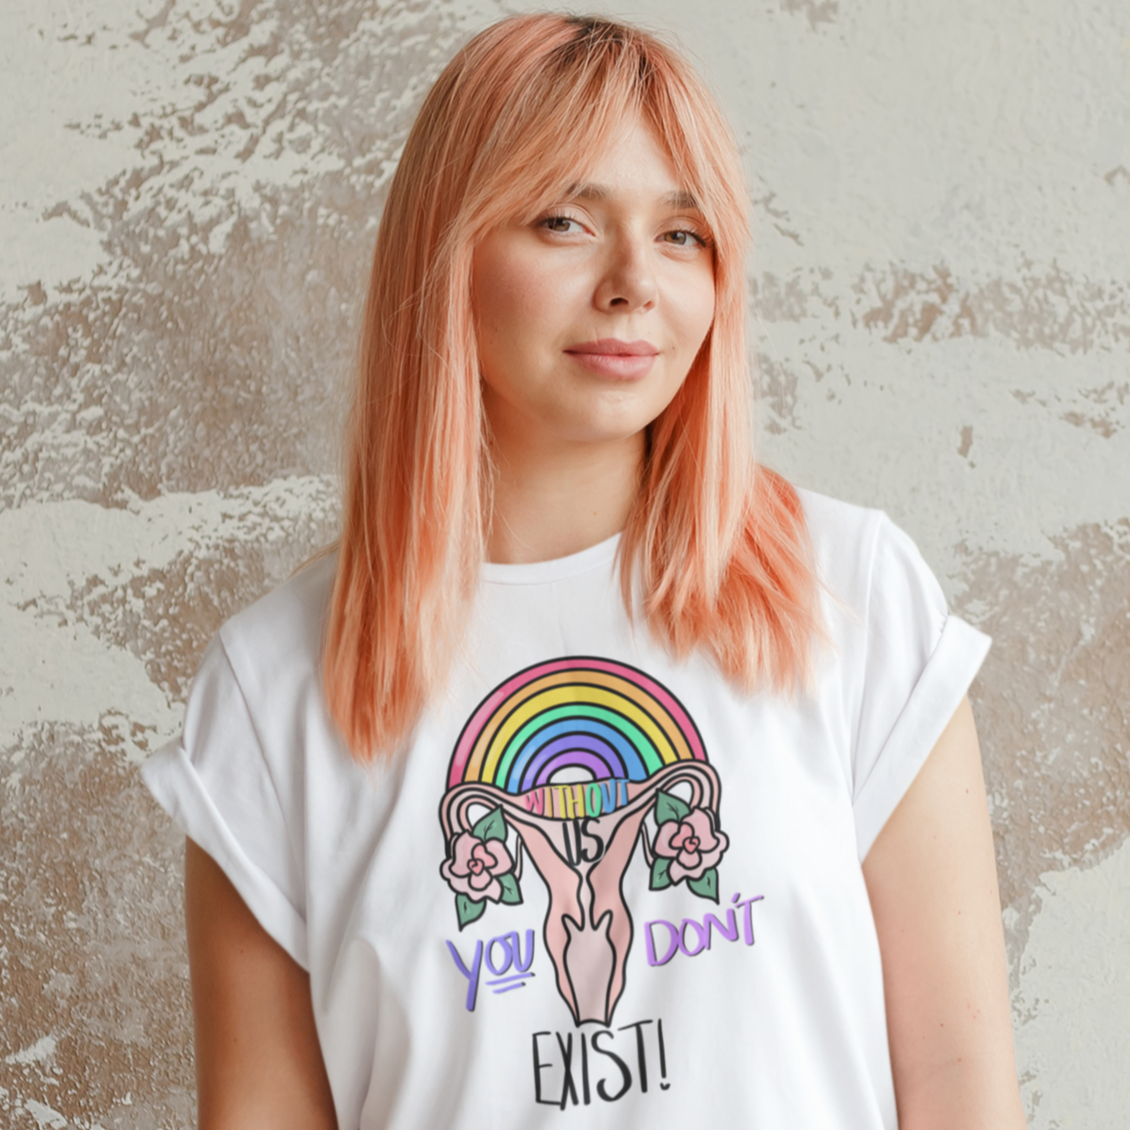 *Without Us You Don't Exist Unisex T-Shirt - Feminist Trash Store 